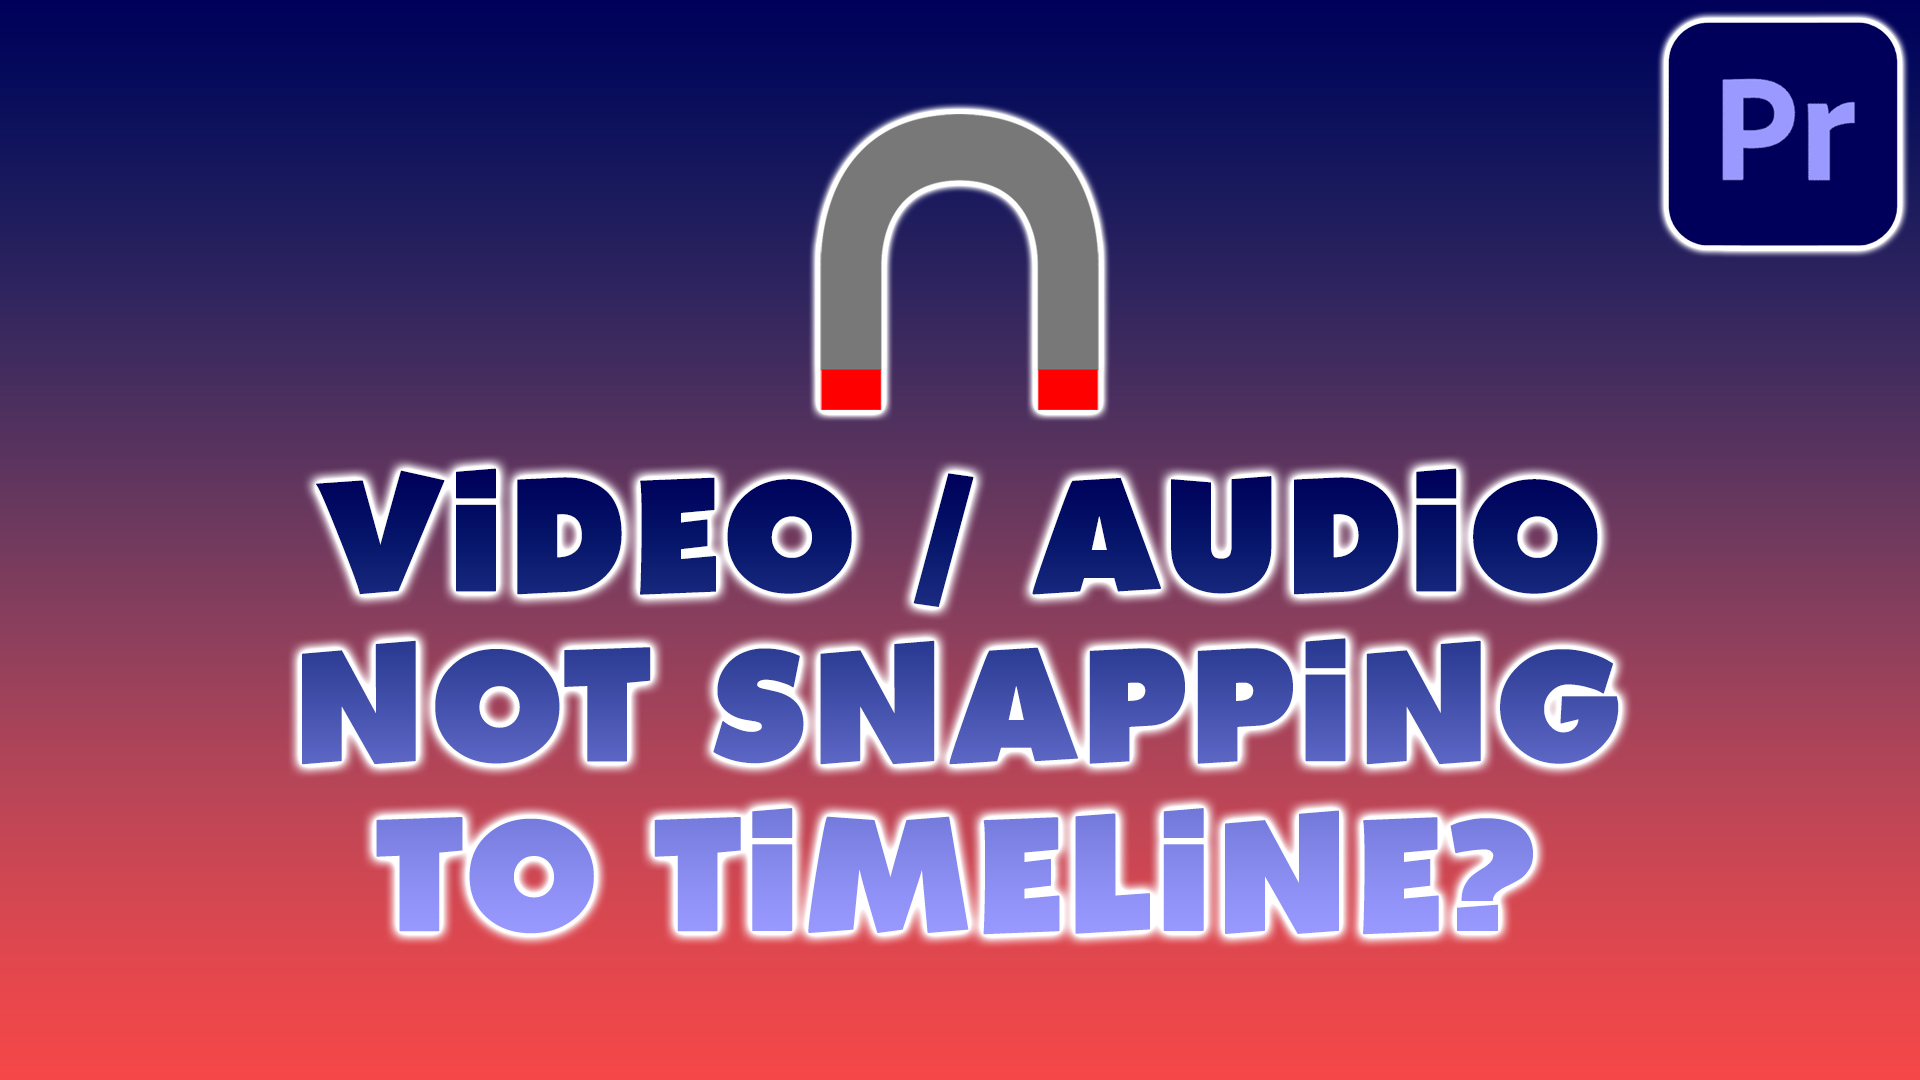 video-audio-not-snapping-to-timeline-premiere-pro-tutorial-you